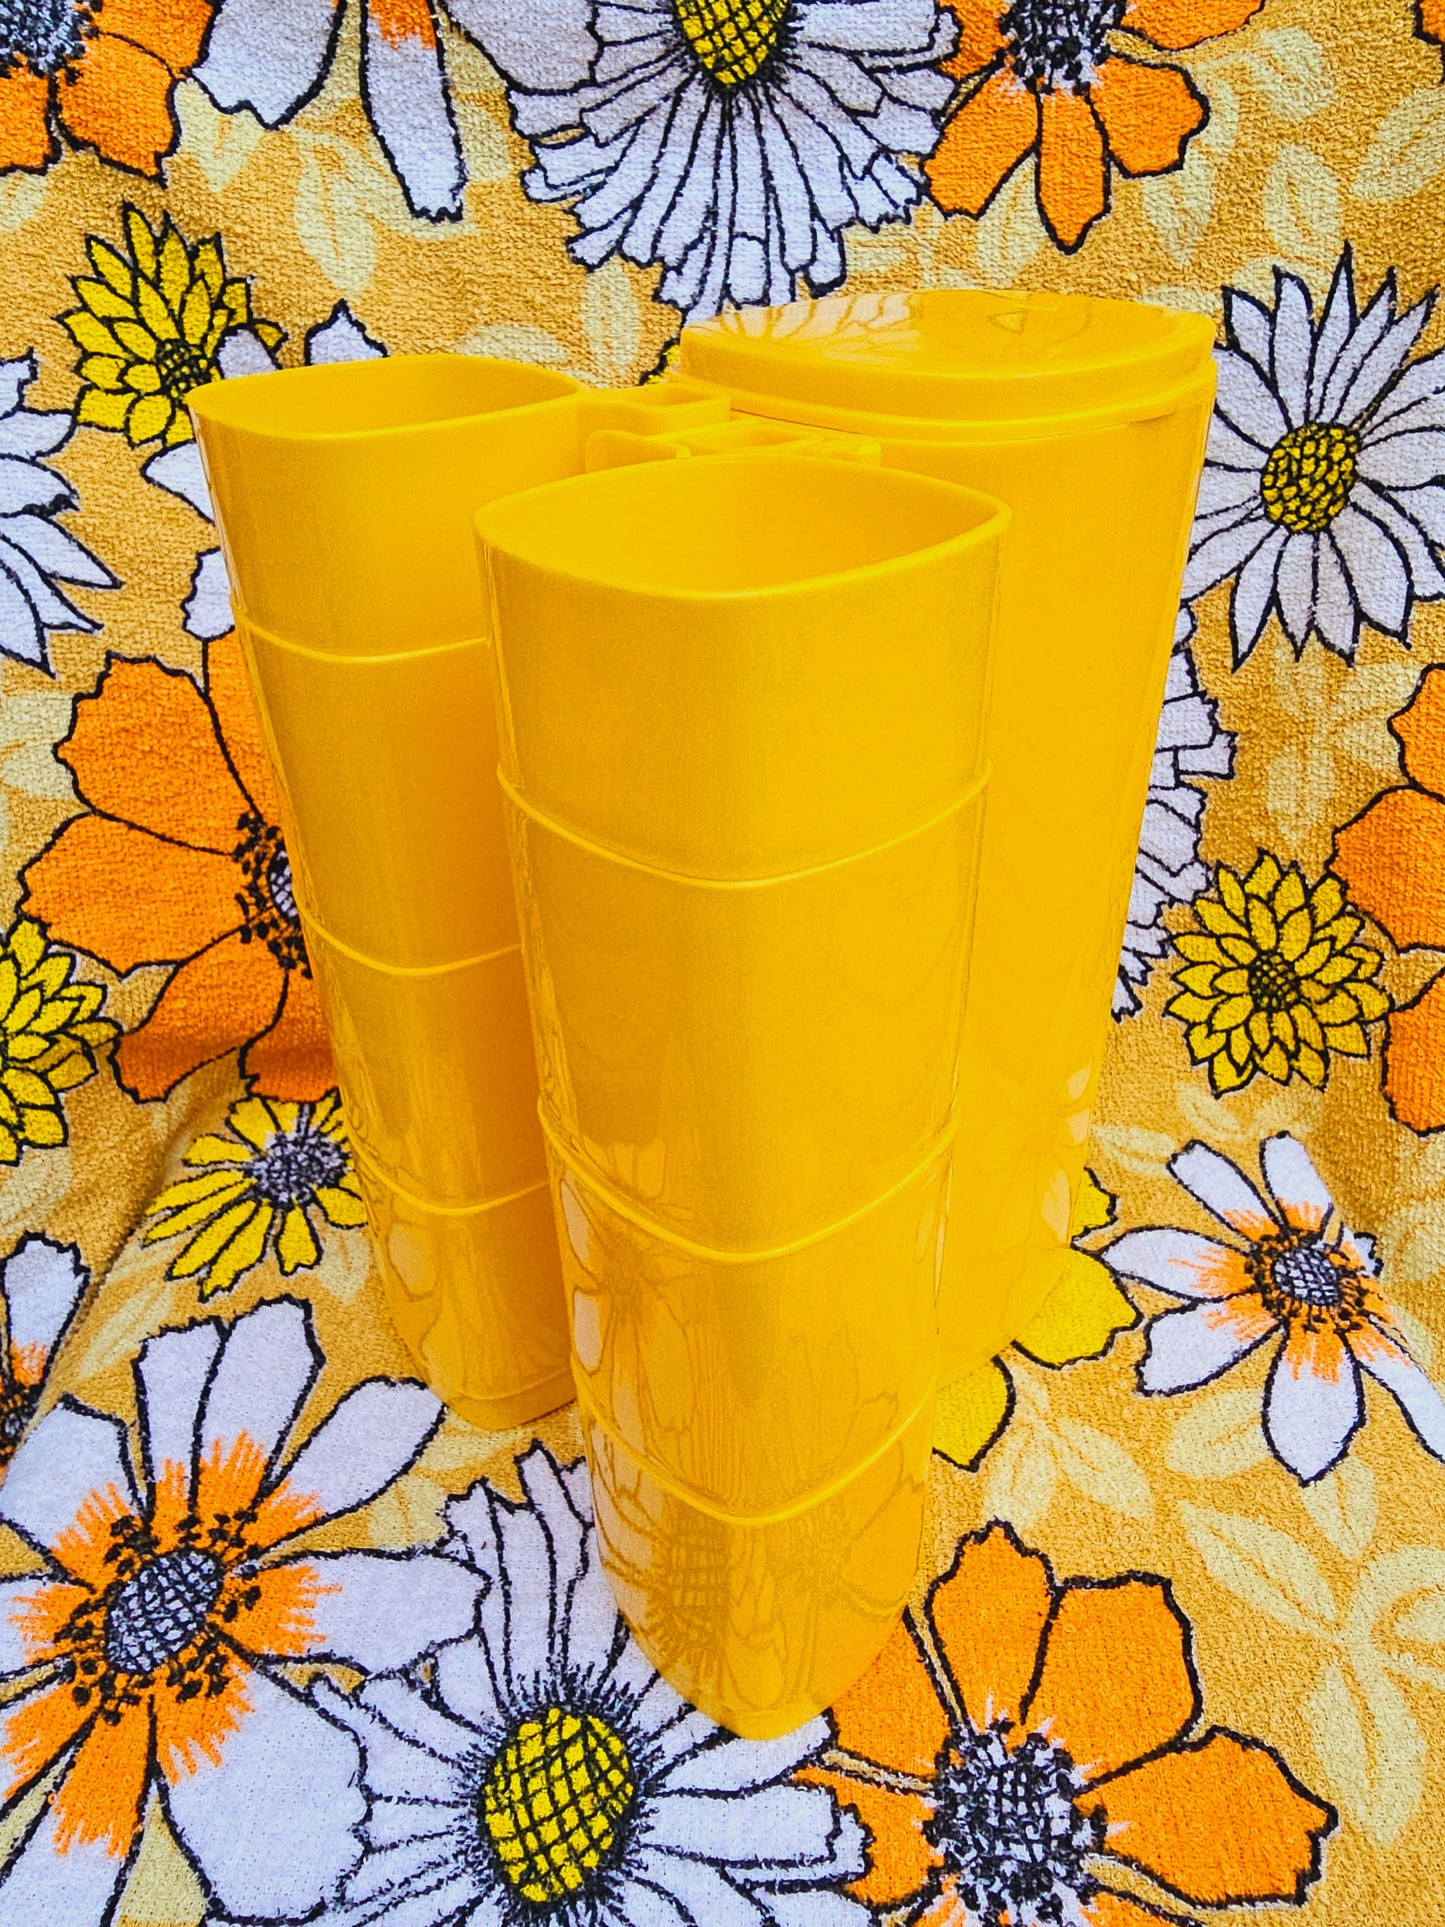 70s/80s Yellow Pitcher & Connected Cup Set